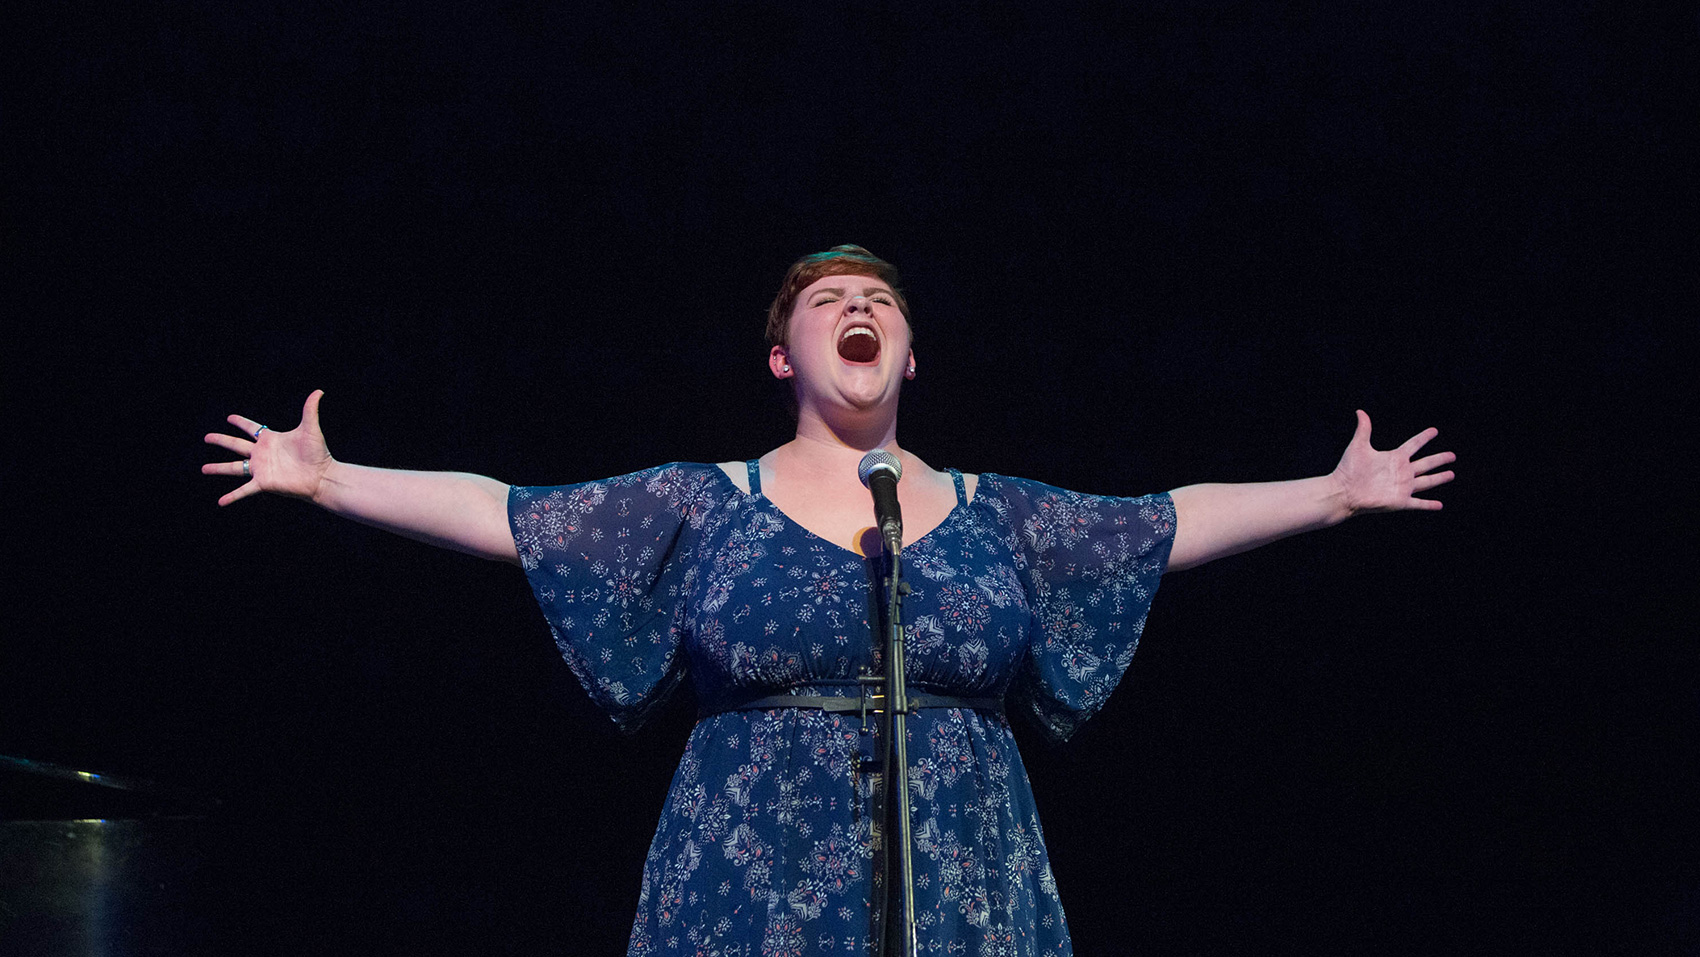 A woman sings loudly, her arms outstretched on either side of her as she does.